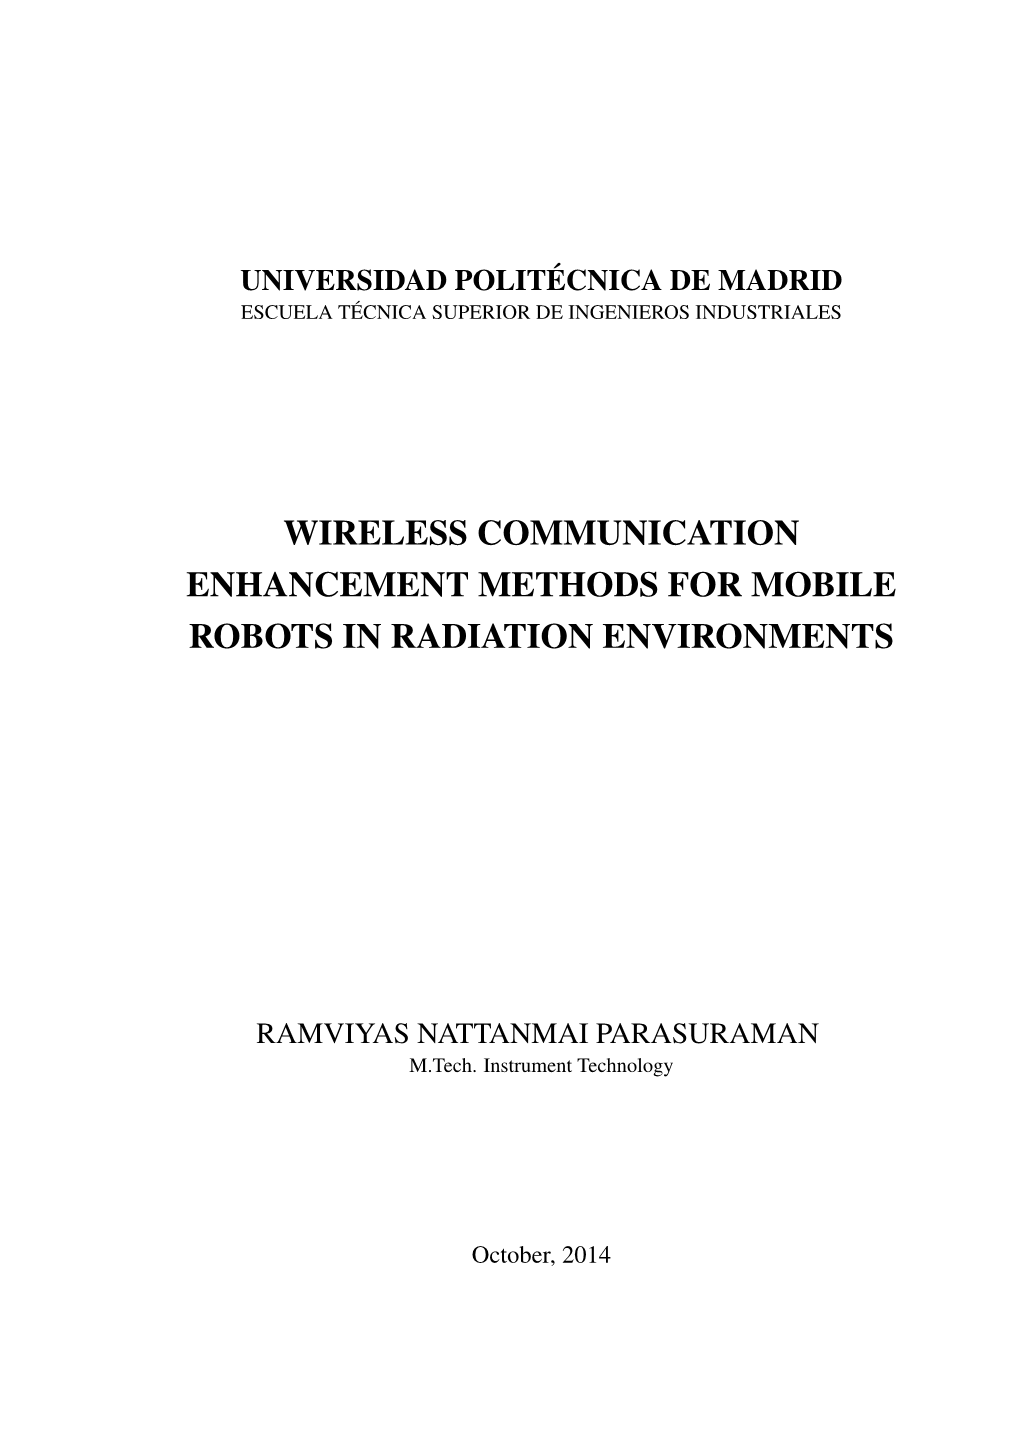 Wireless Communication Enhancement Methods for Mobile Robots in Radiation Environments